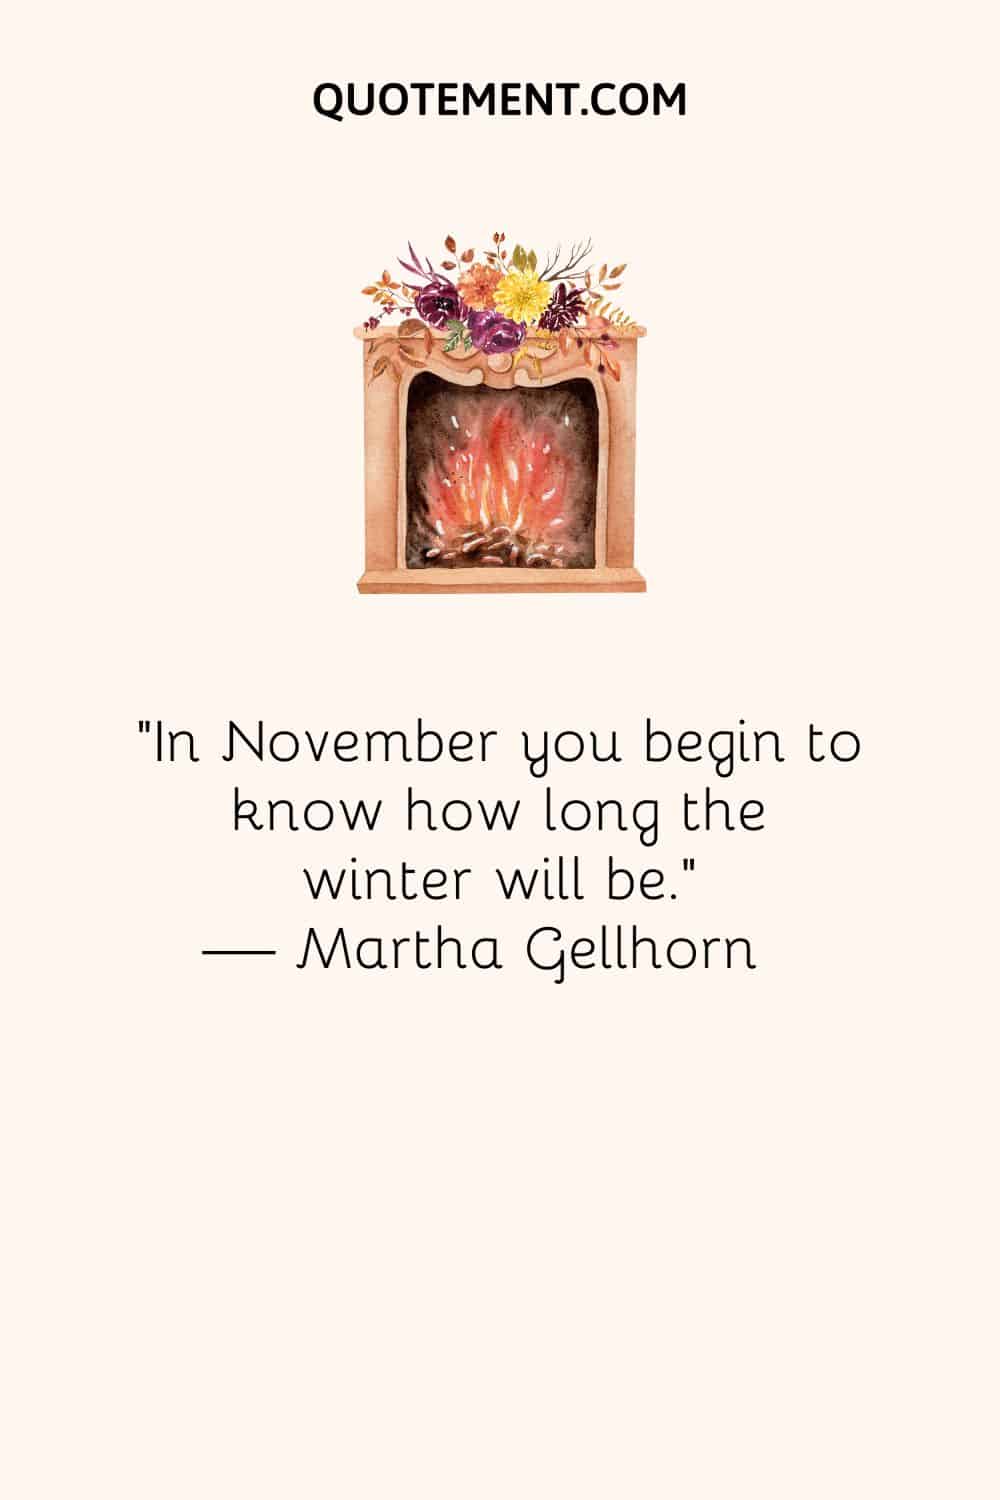 In November you begin to know how long the winter will be